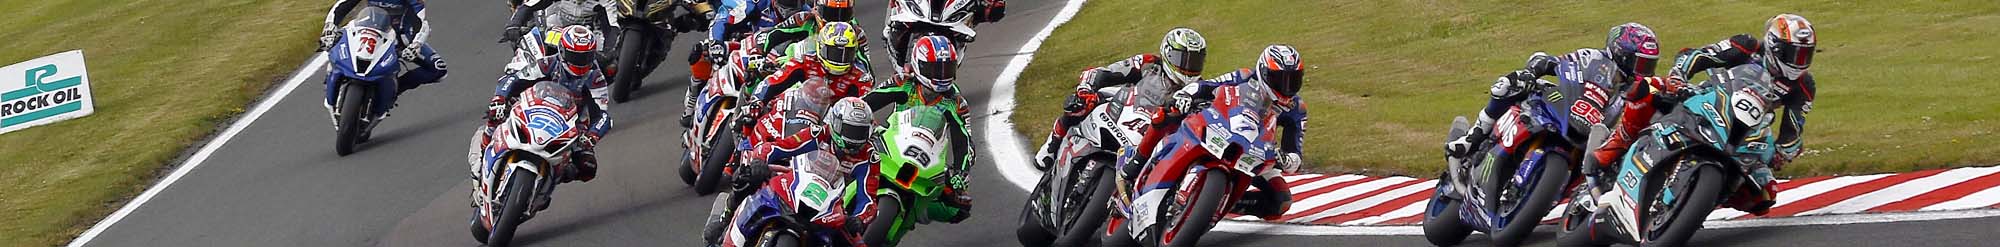 Jackson wins incident-packed race two at Oulton Park  